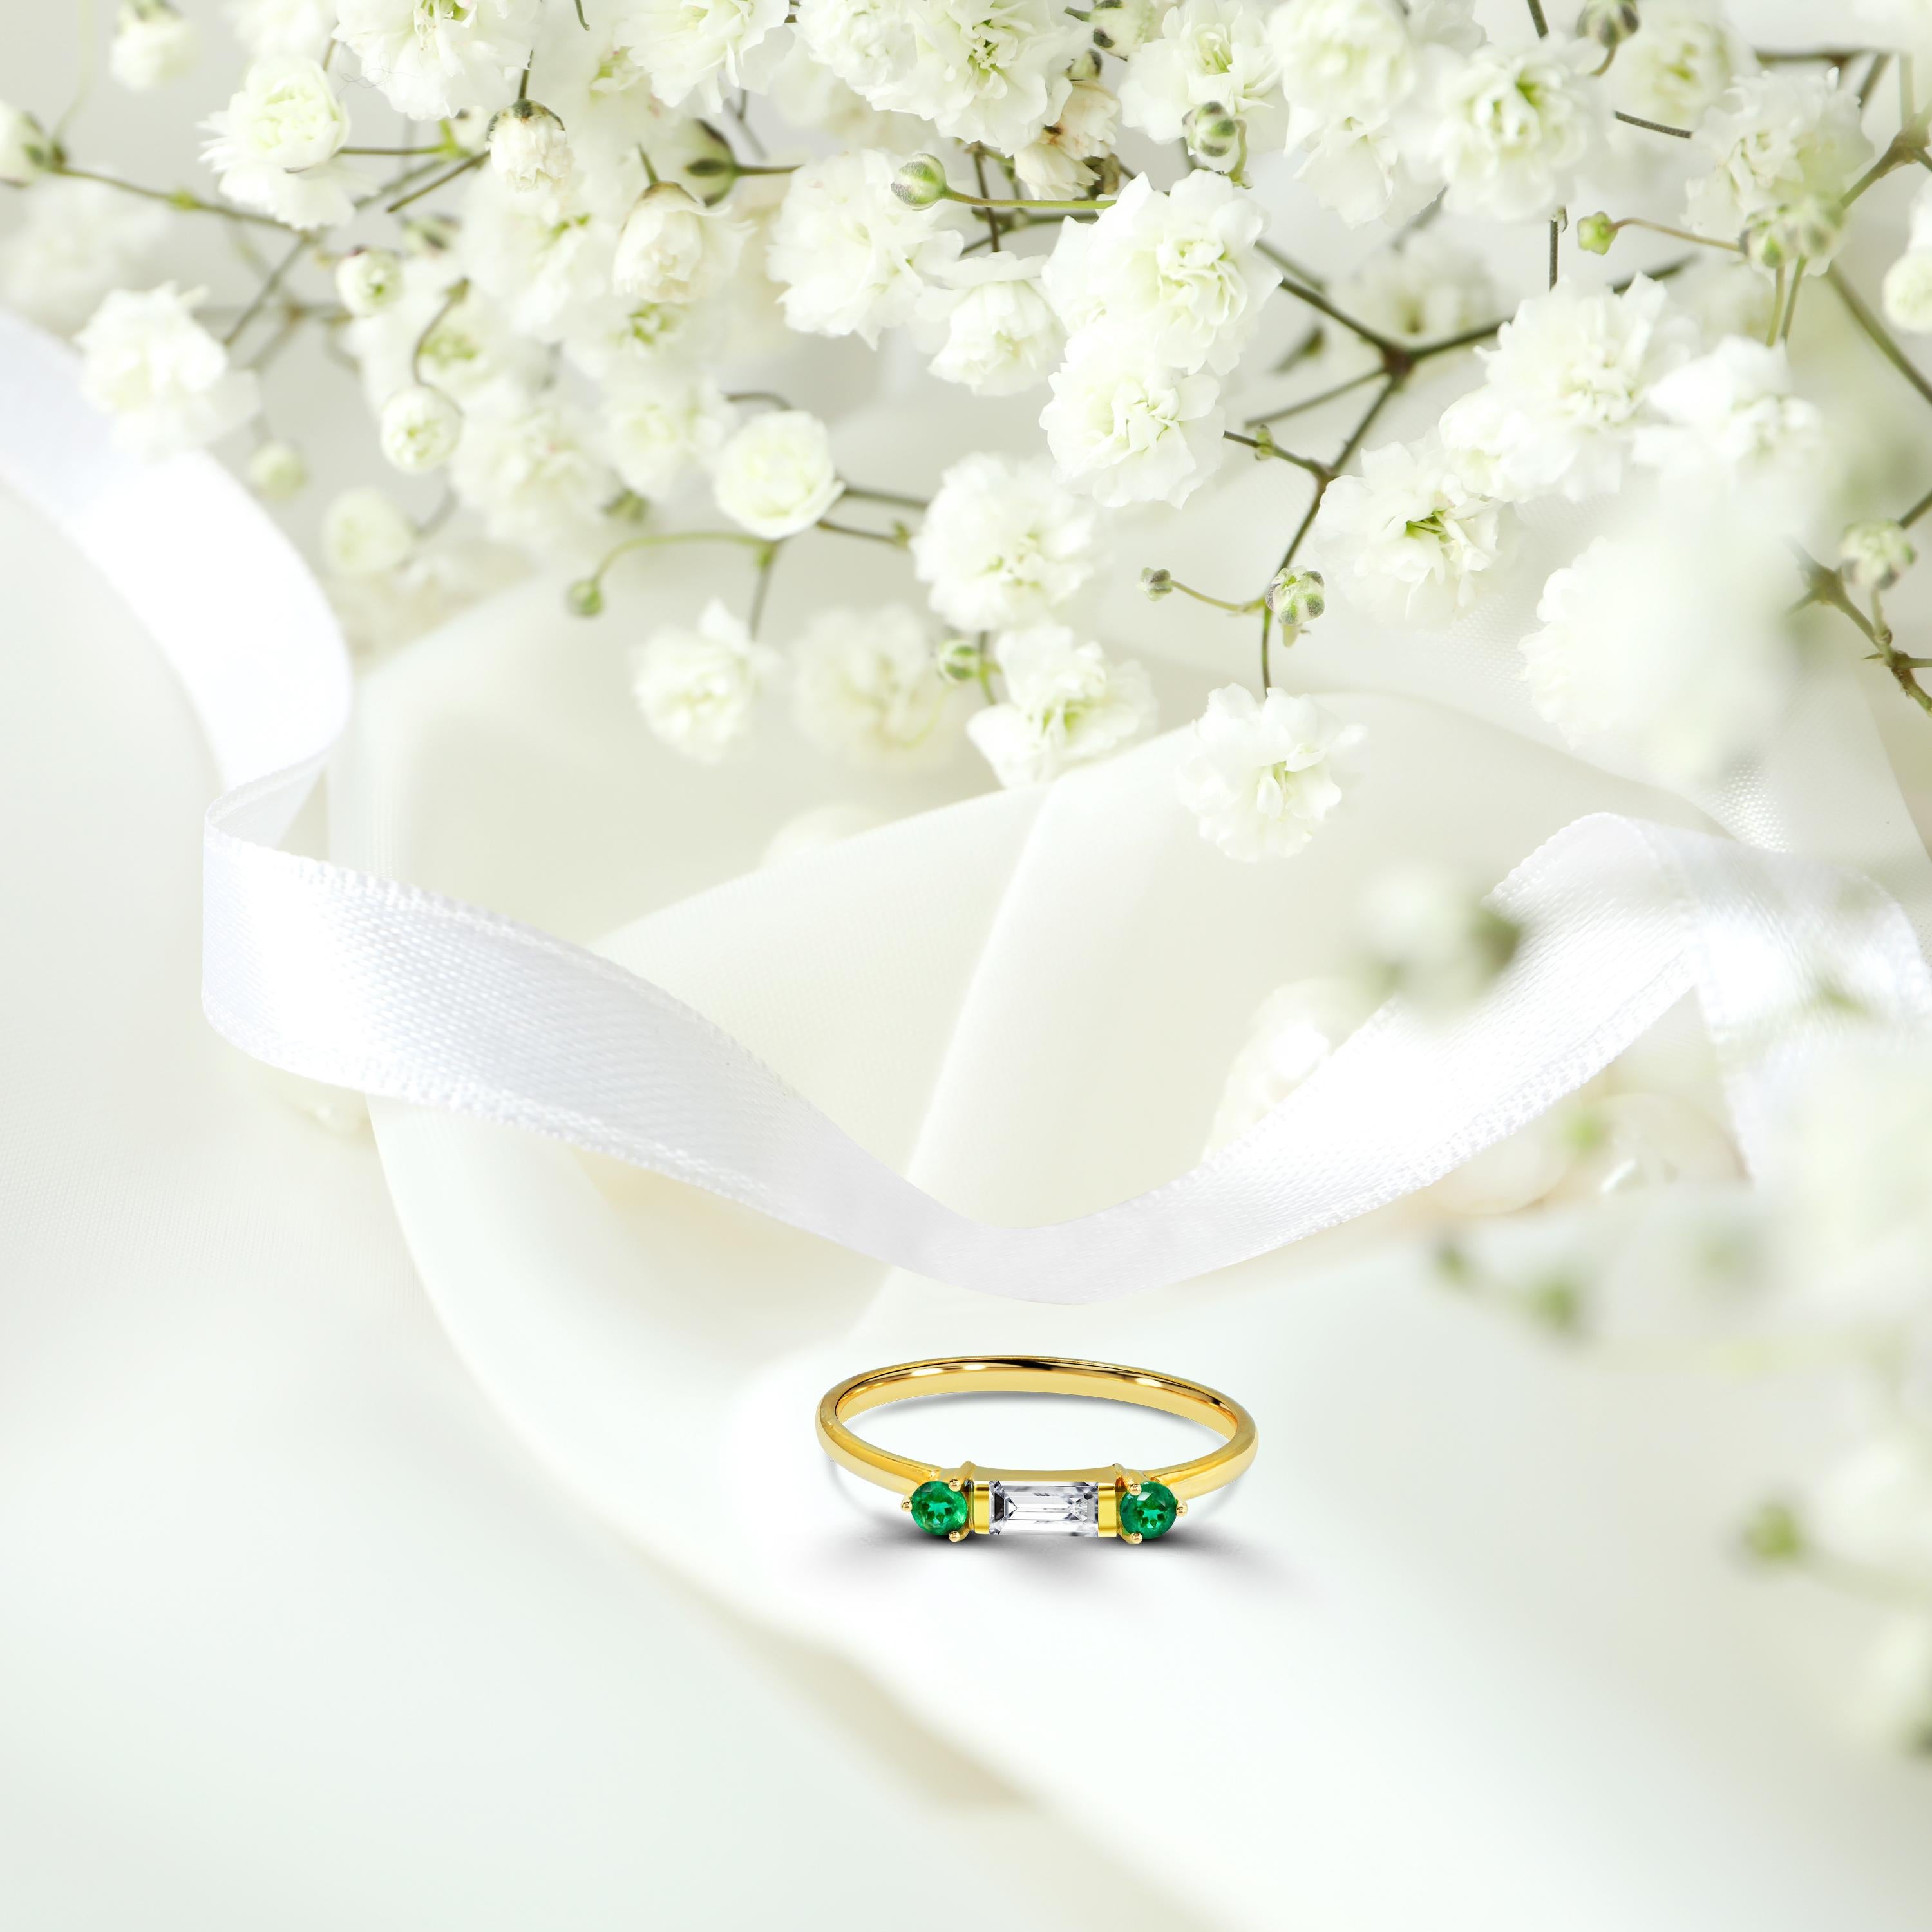 For Sale:  14k Gold Dainty Baguette Diamond Ring with Emerald Minimal Ring 7